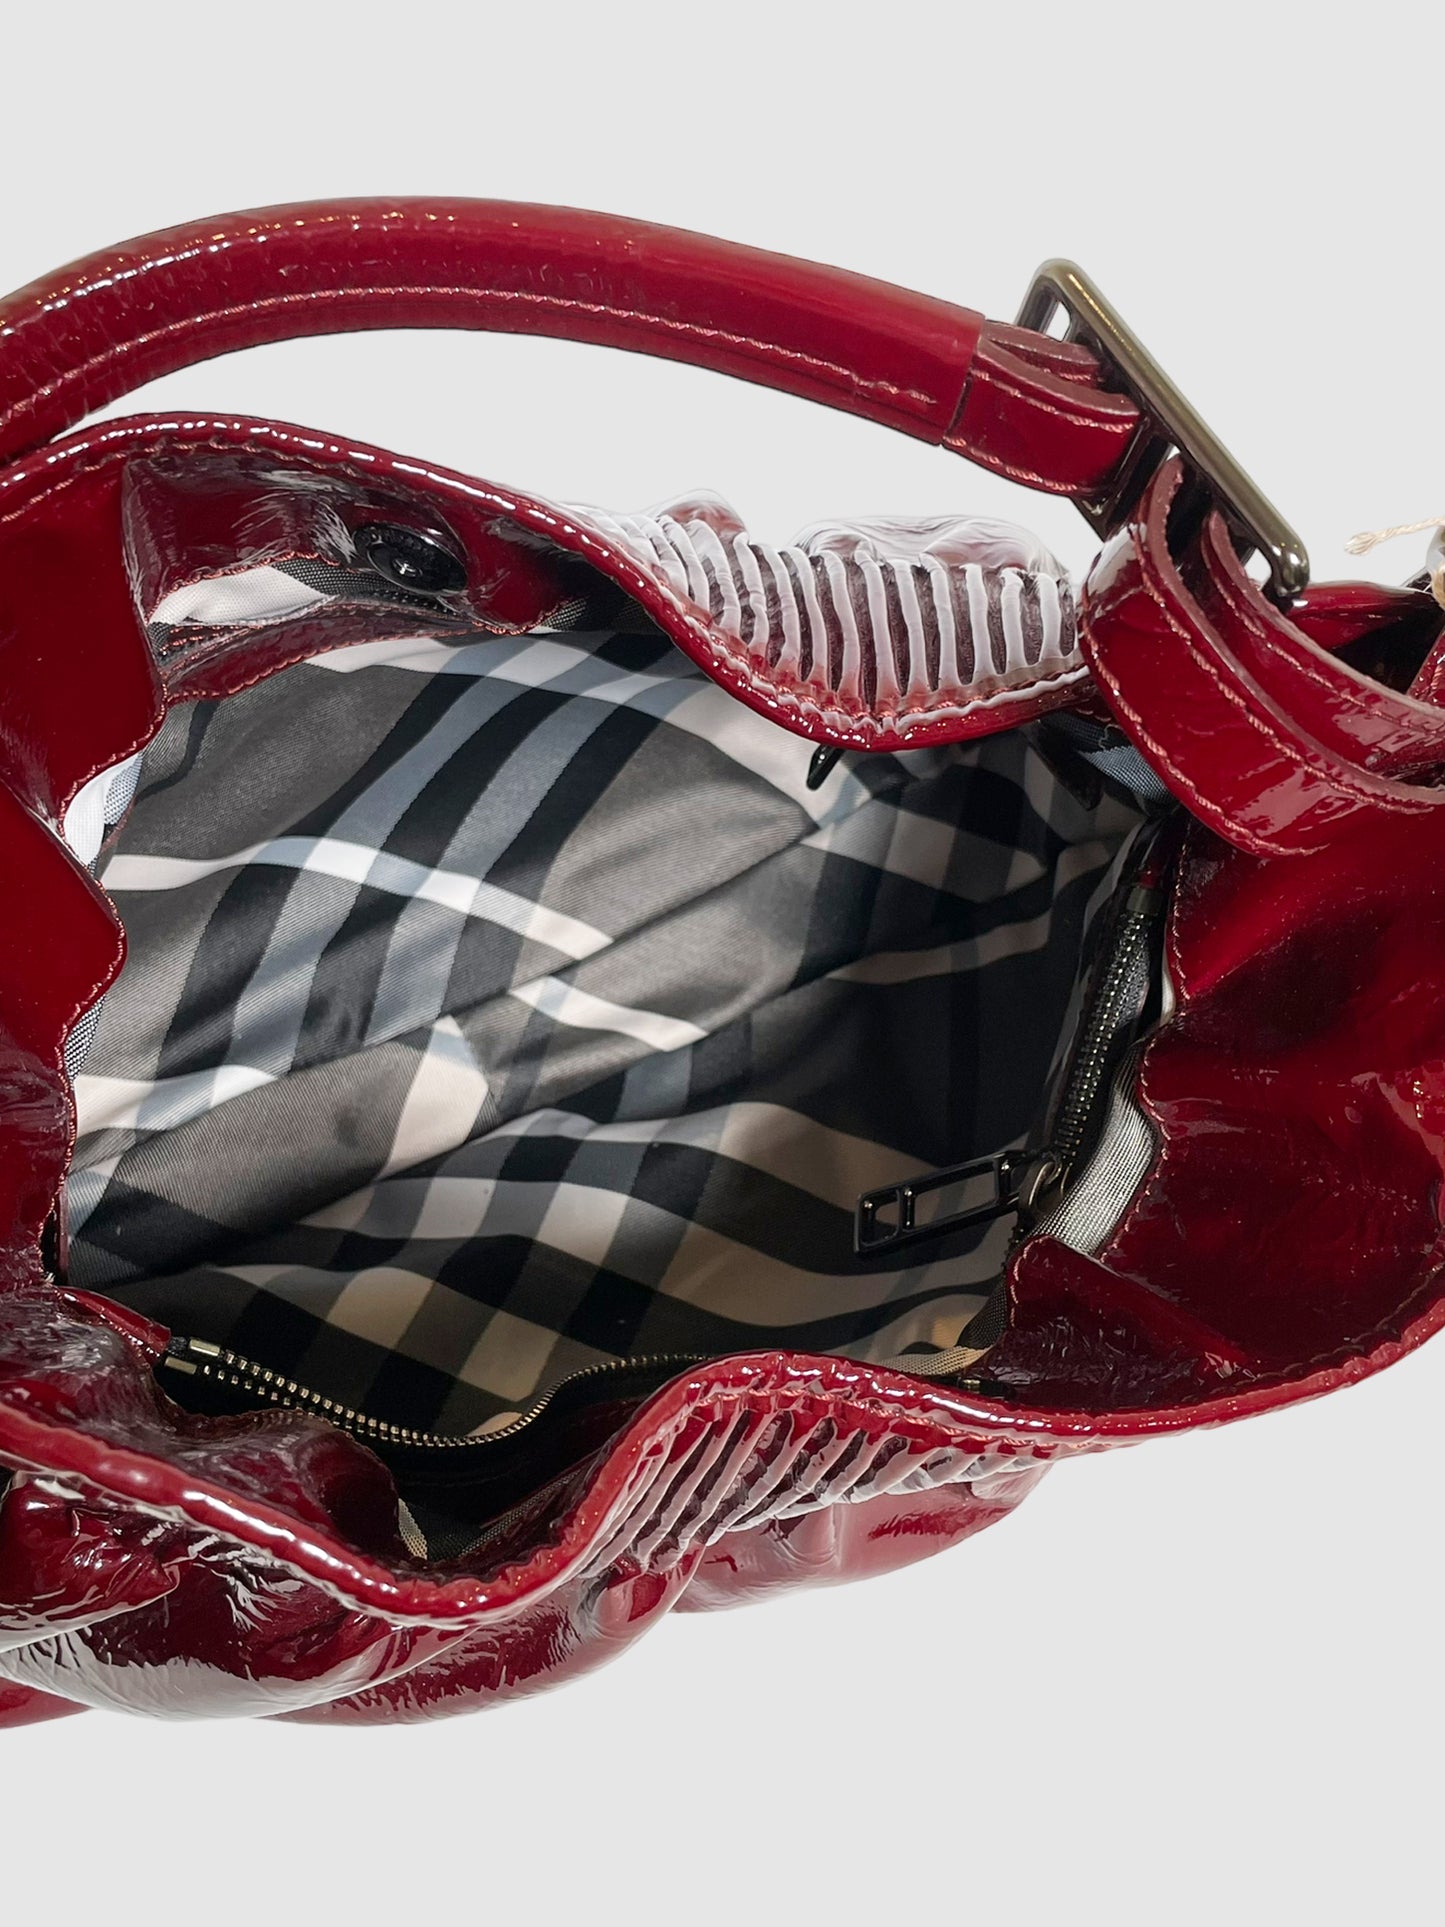 Burberry London Patent Leather Hobo Bag